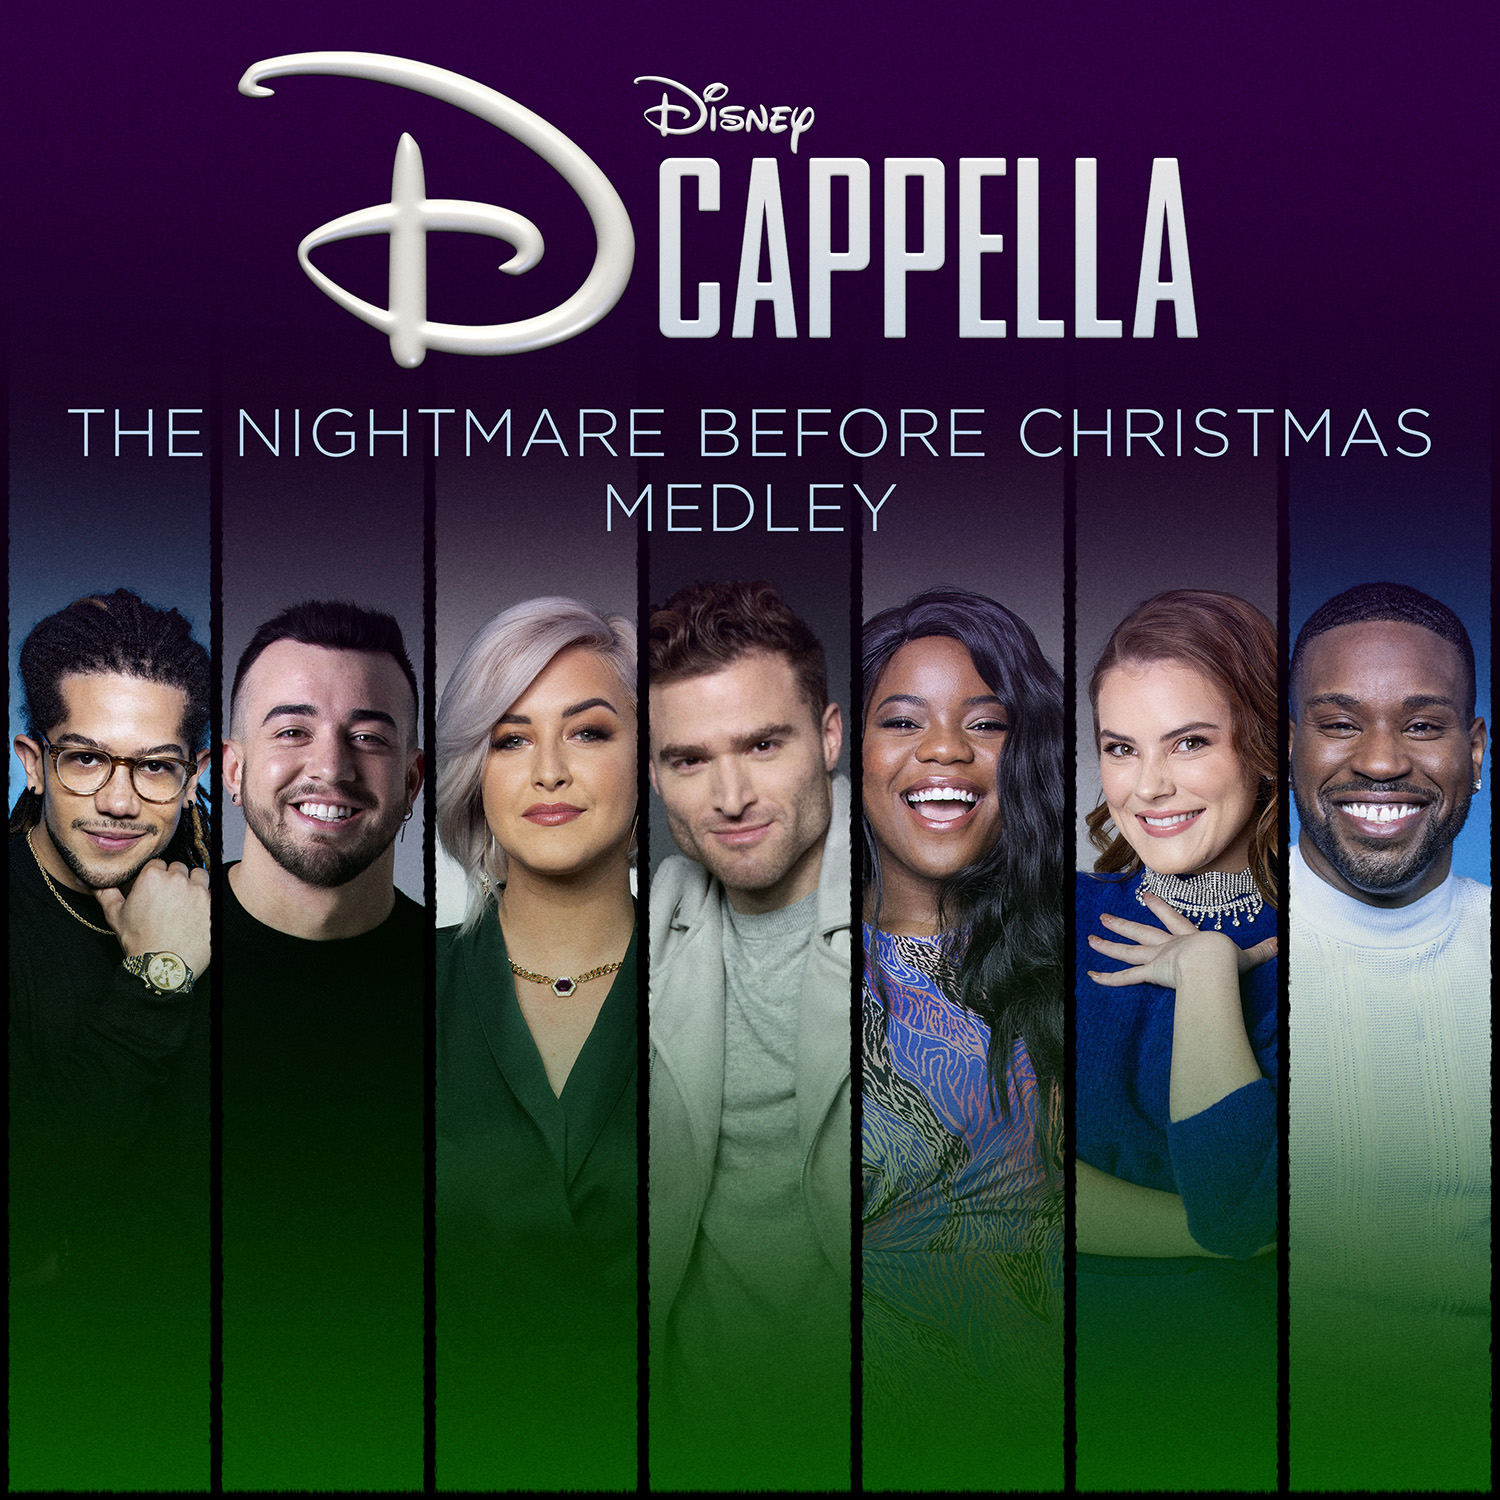 The Nightmare Before Christmas Medley